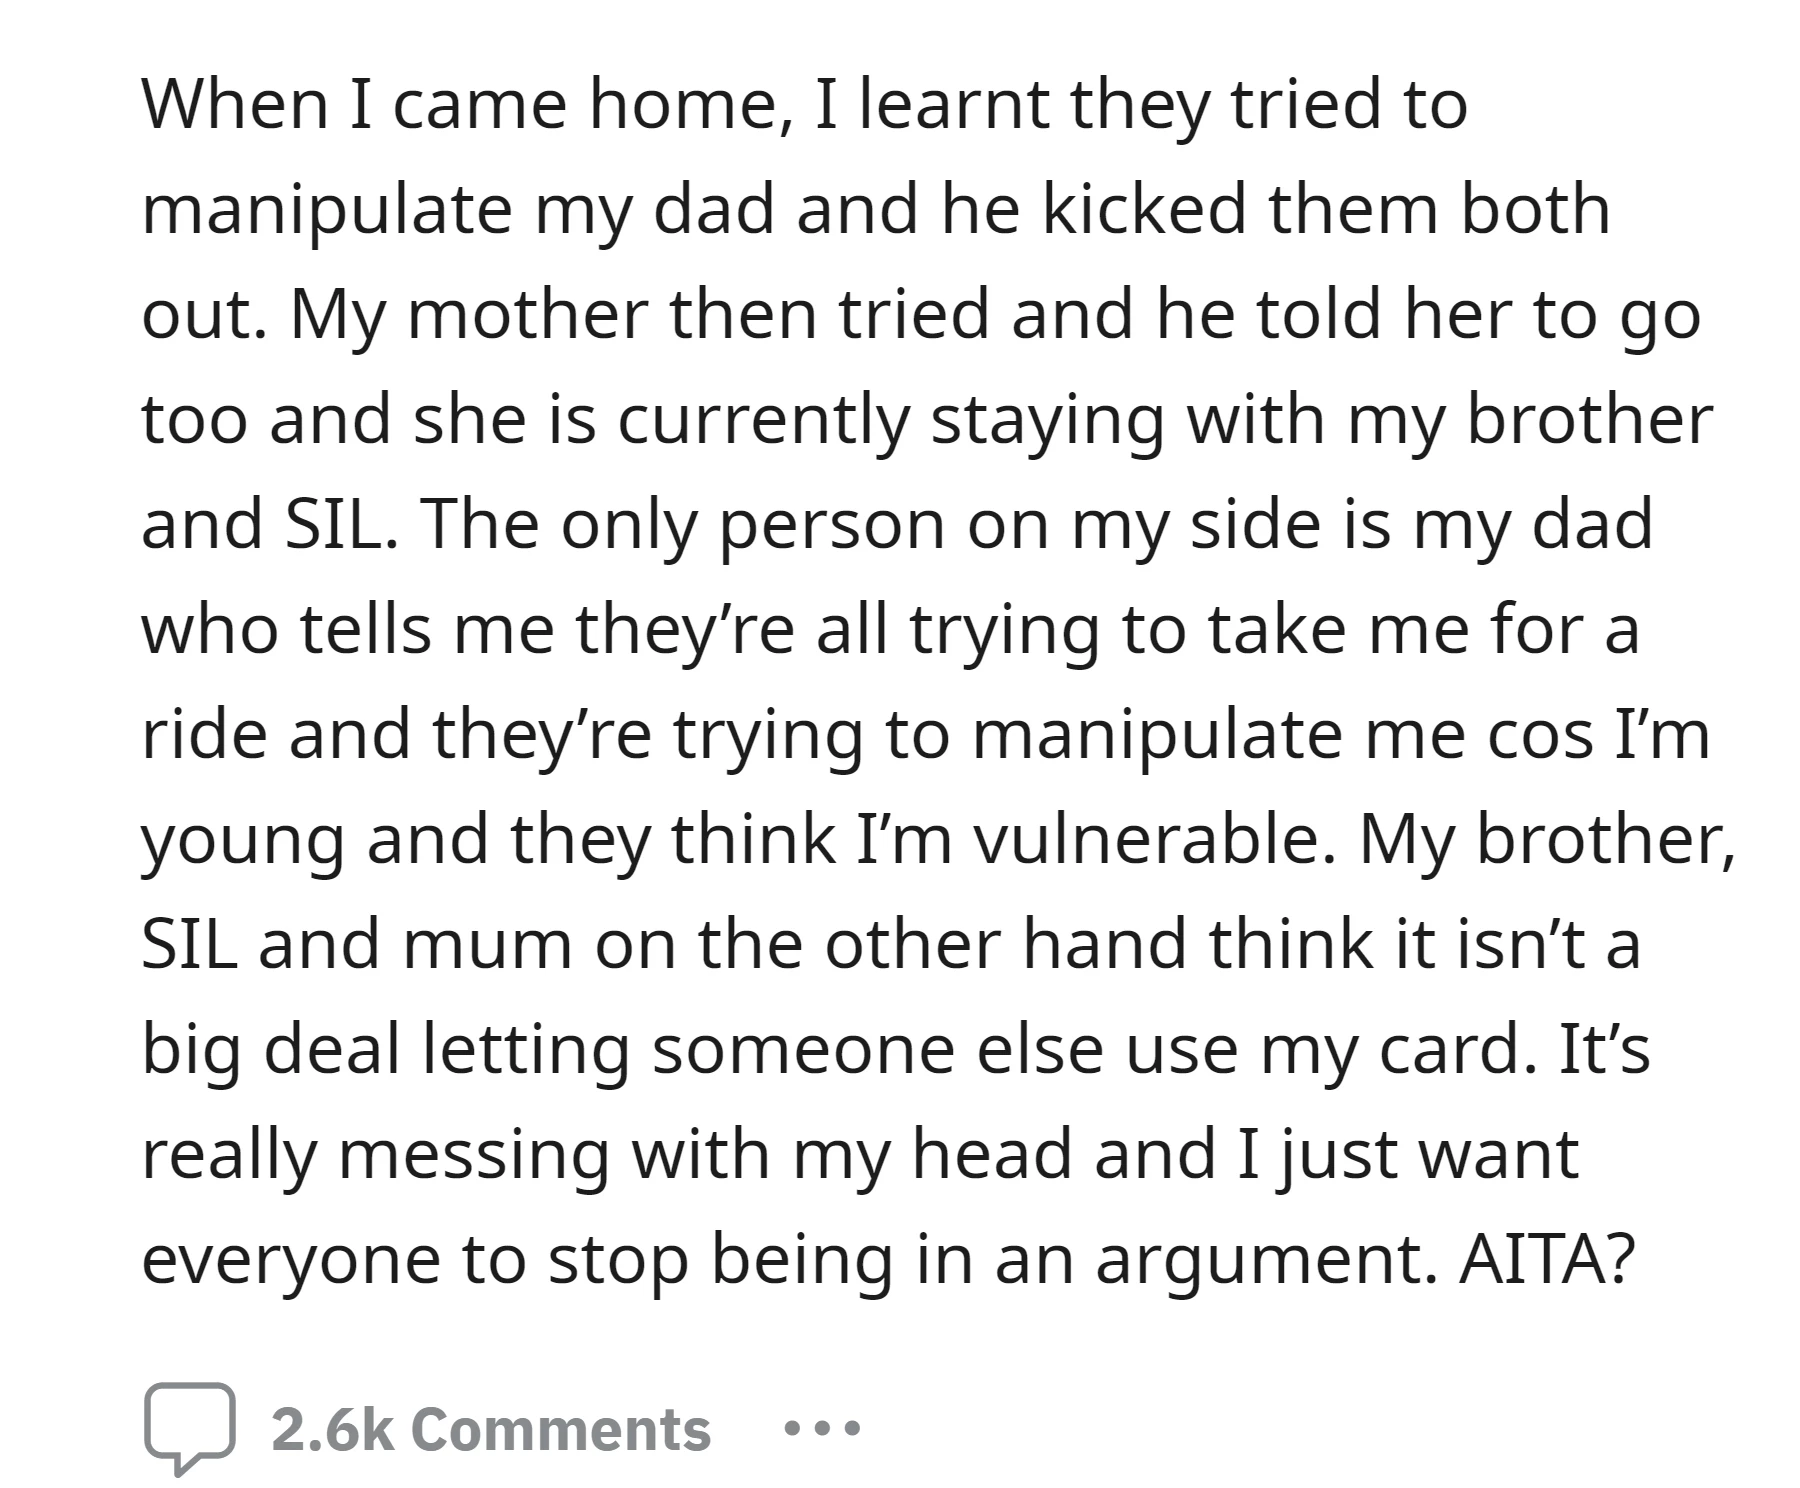 OP's brother and sister-in-law had manipulated her parents, leading to her father kicking them out